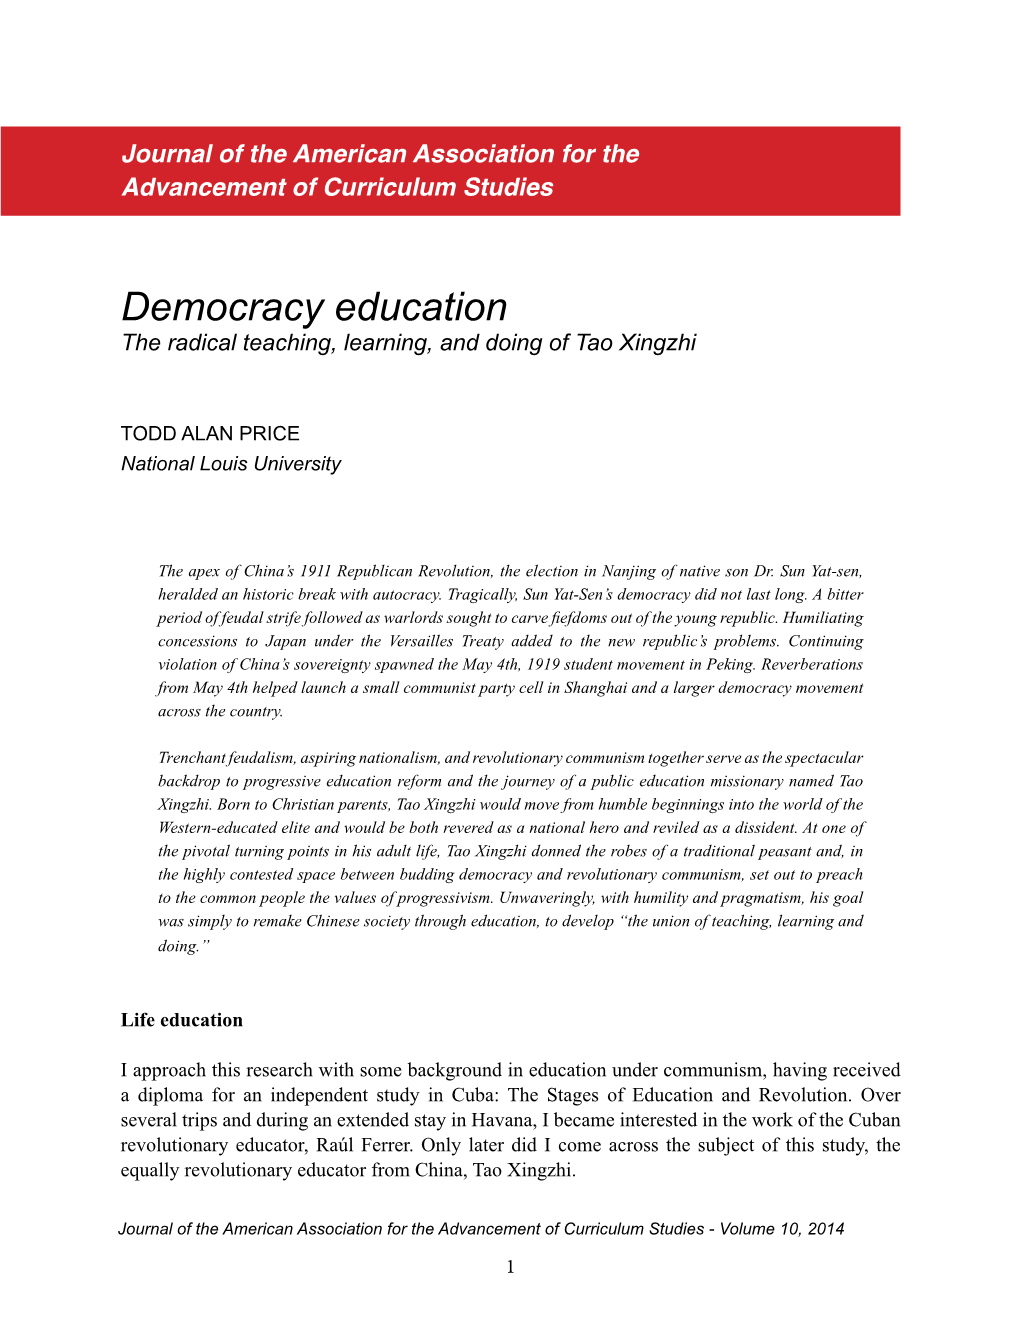 Democracy Education the Radical Teaching, Learning, and Doing of Tao Xingzhi